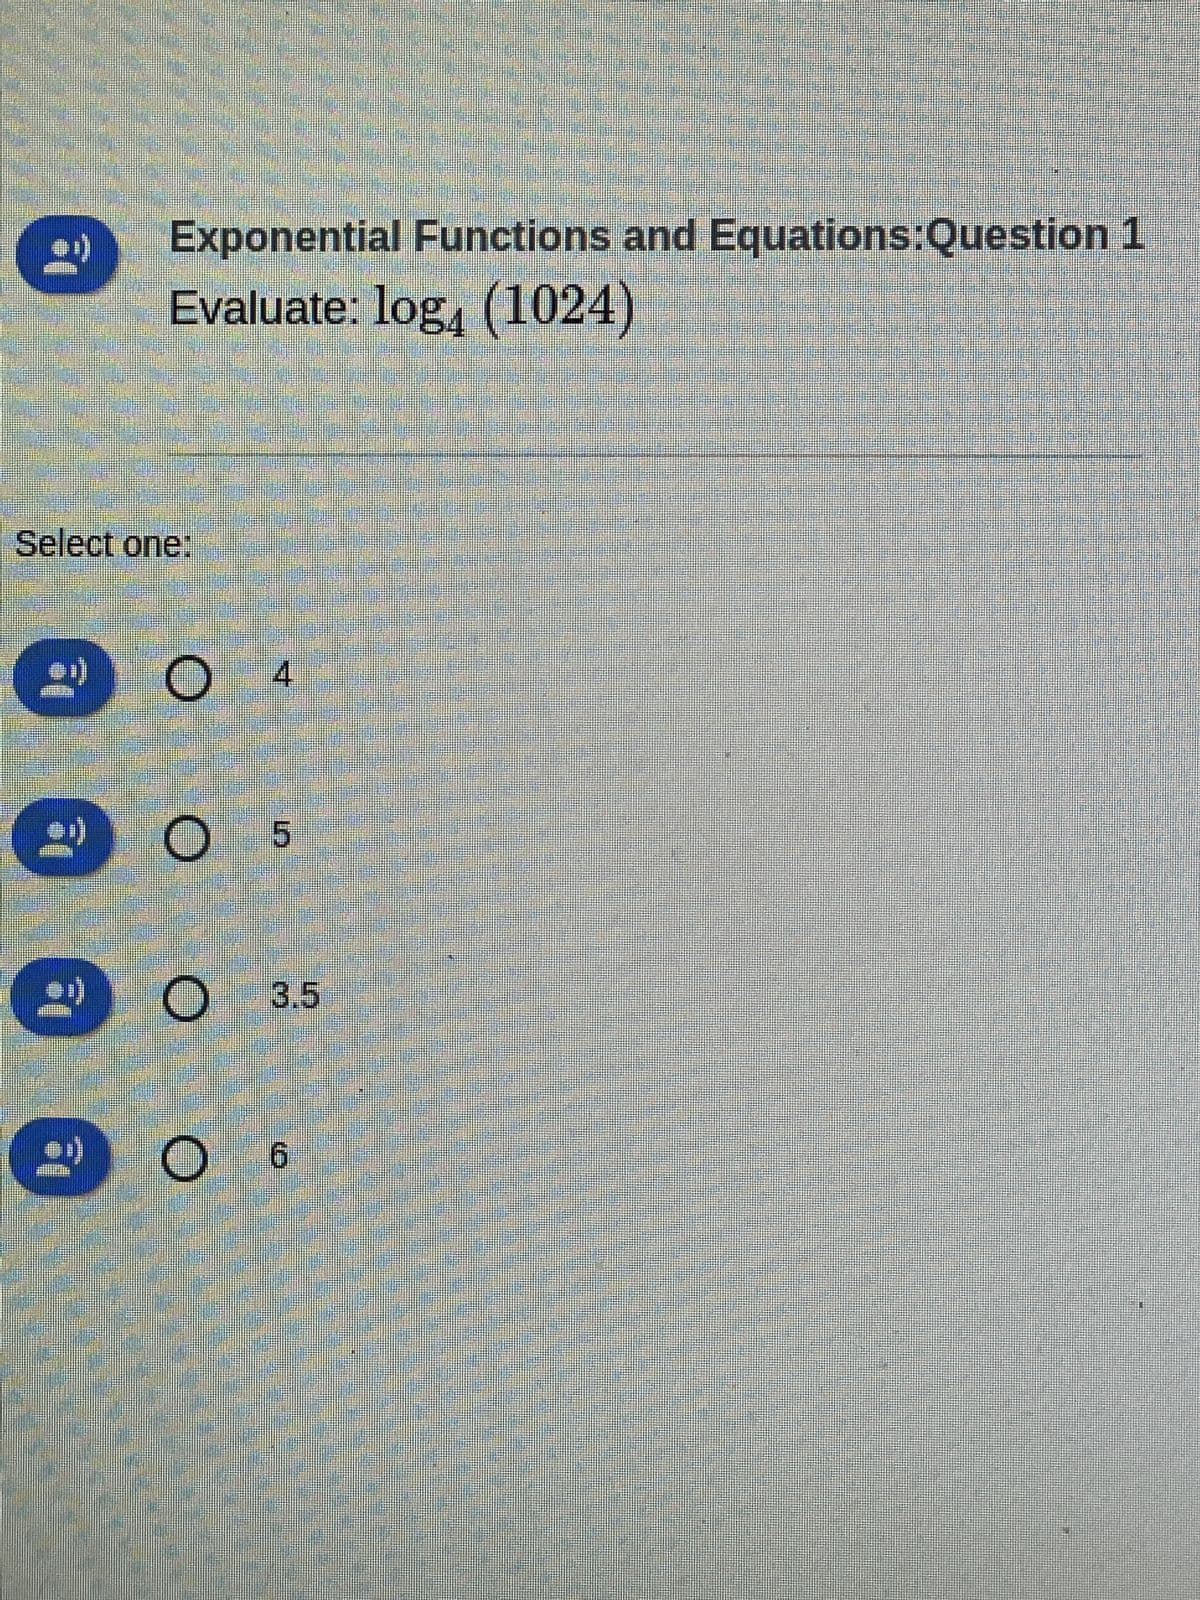 Exponential Functions and Equations:Question 1
Evaluate: log4 (1024)
Select one:
ei)
O 4
5
3.5
O O
O 6